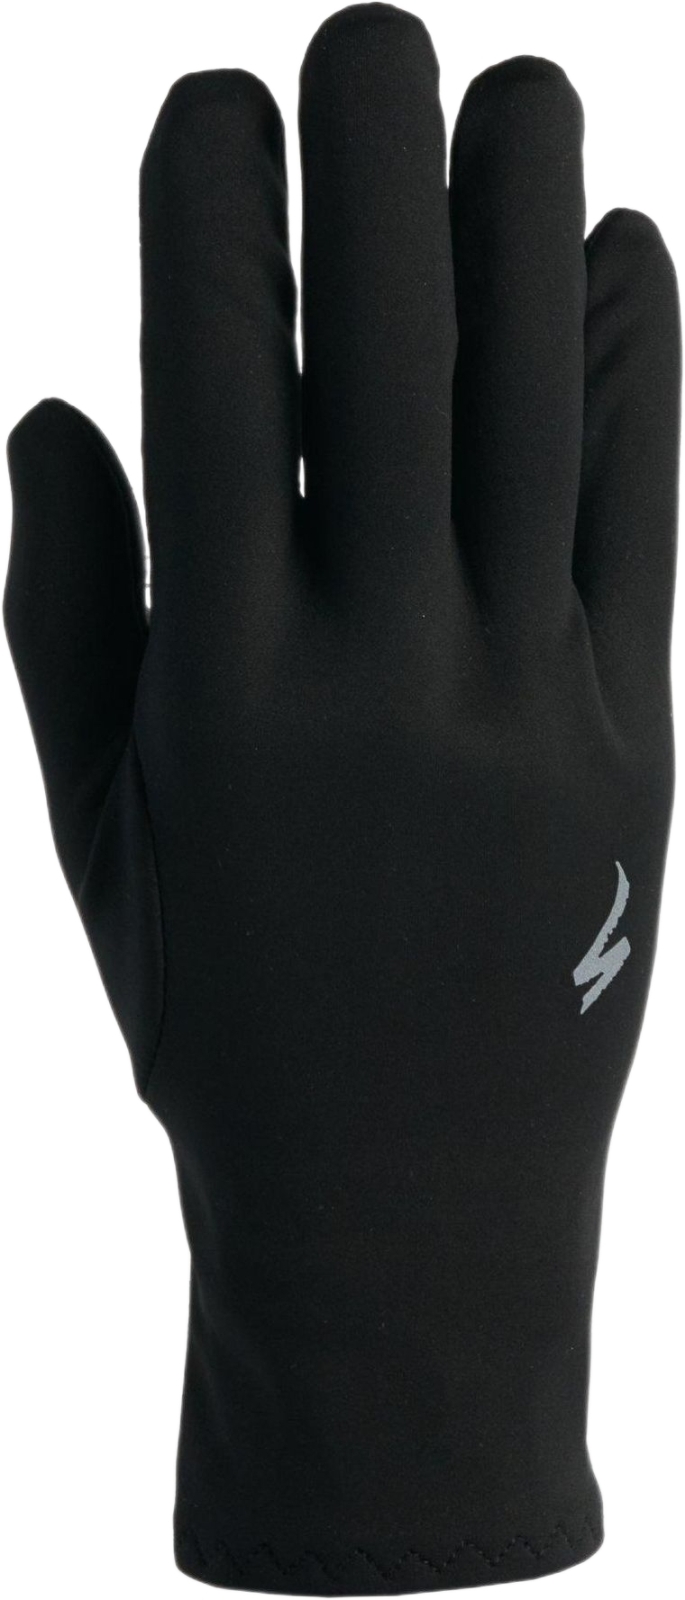 E-shop Specialized Men's Softshell Thermal Glove - black L